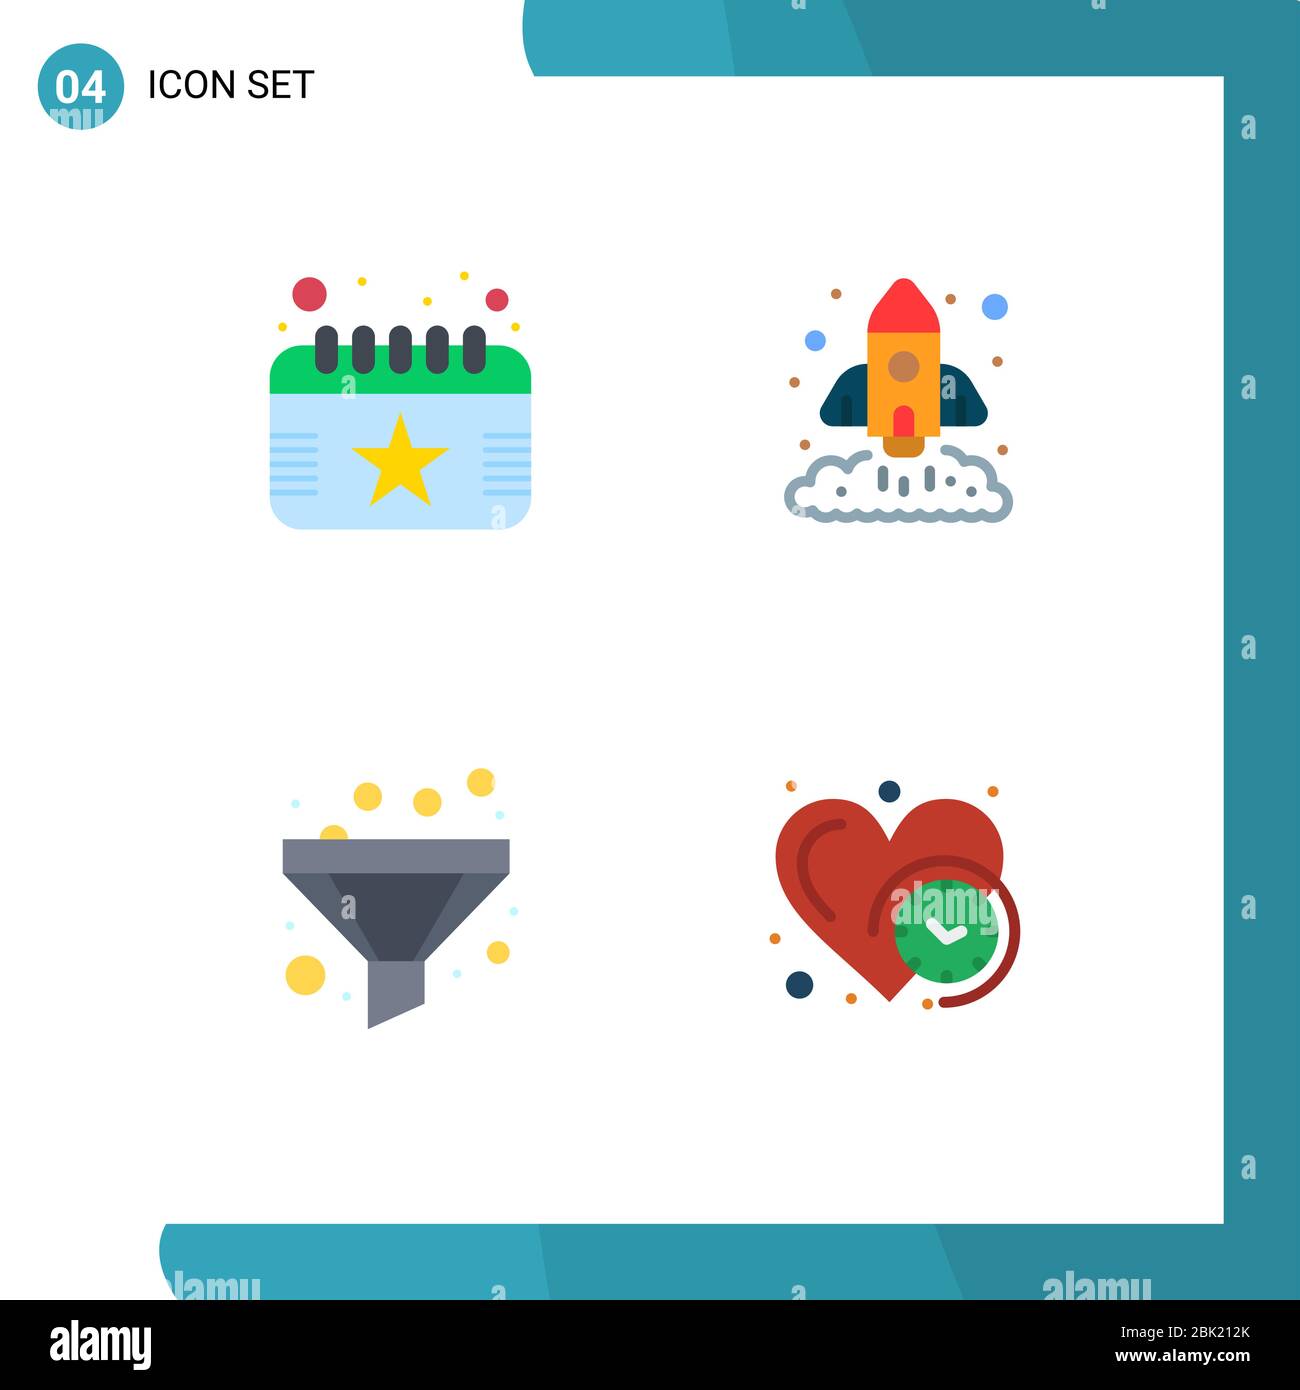 Mobile Interface Flat Icon Set Of 4 Pictograms Of Calendar Filter Date Marketing Sort Editable Vector Design Elements Stock Vector Image Art Alamy